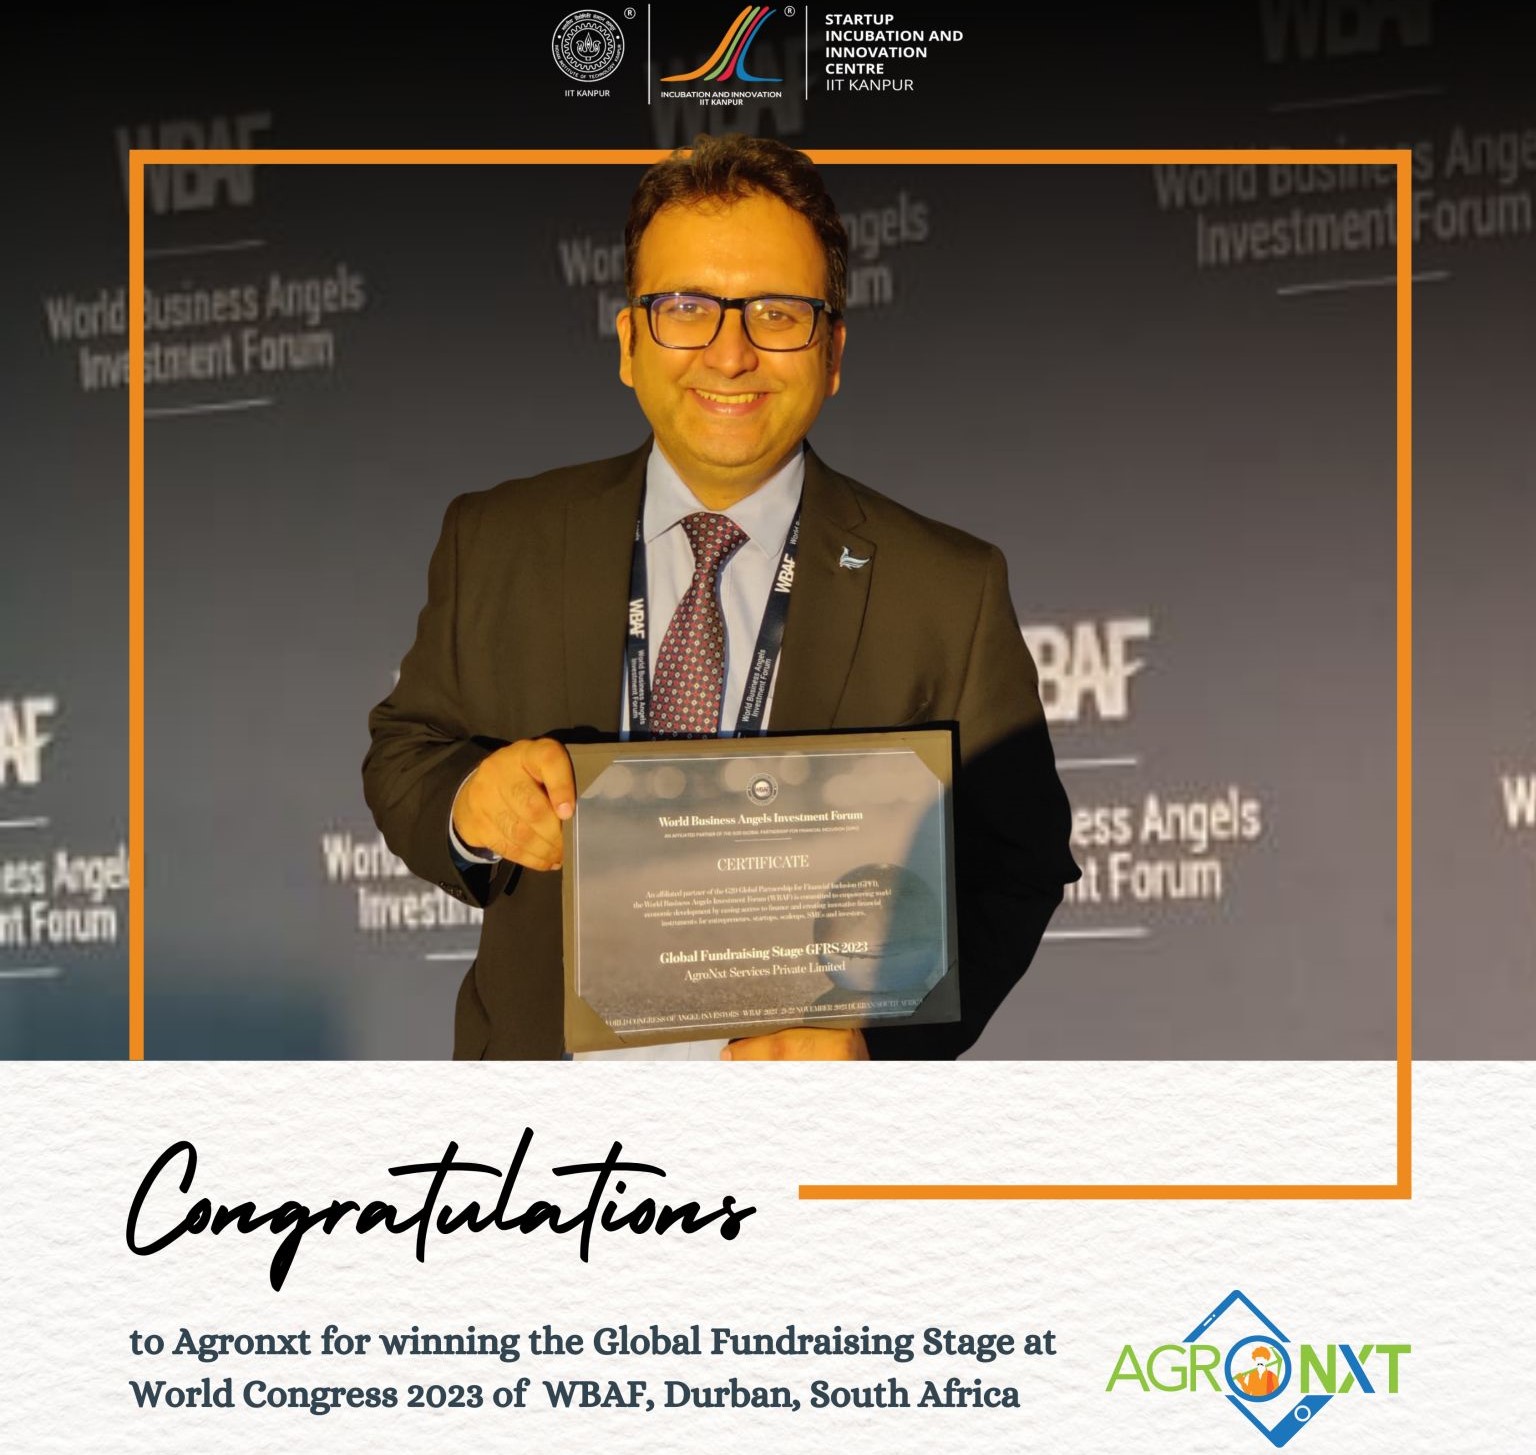 We emerged as the winner of the Global Fundraising Stage at World Congress 2023 of WBAF, Durban, South Africa.